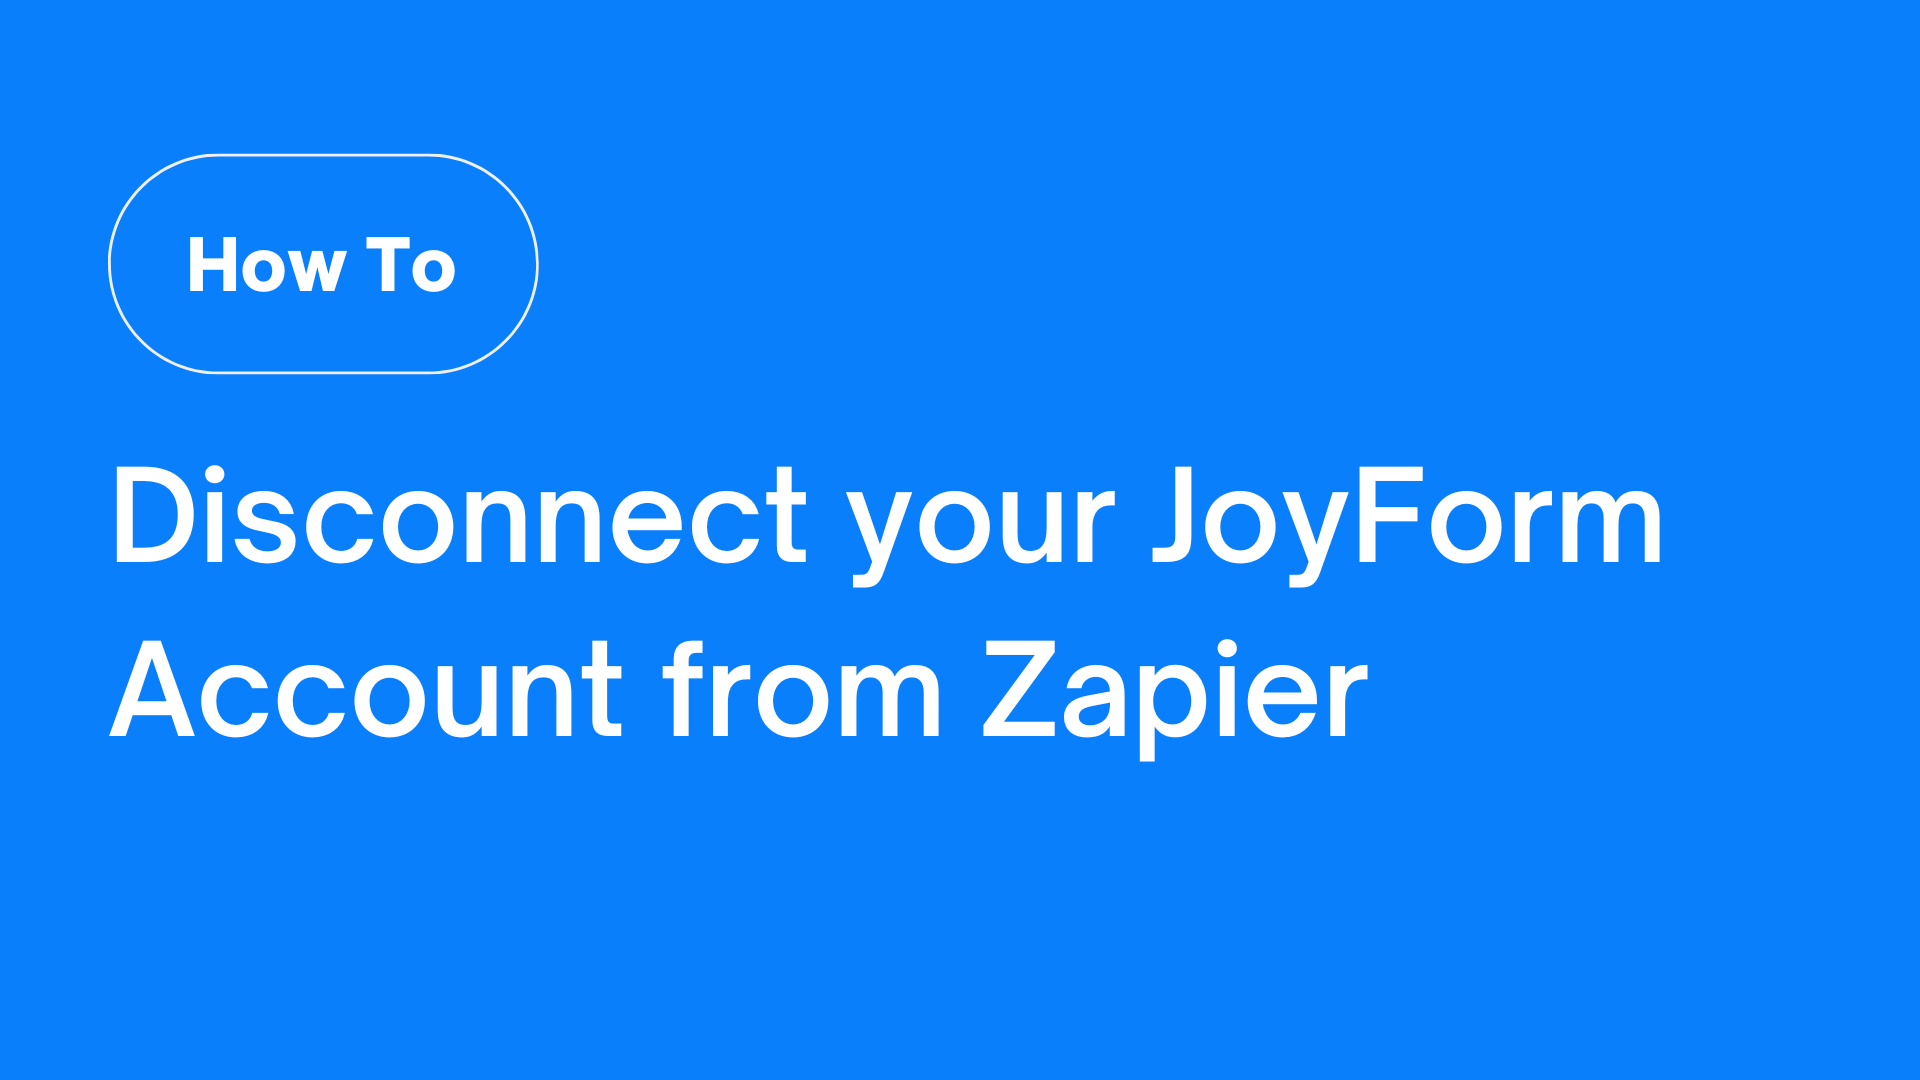 [How To] Disconnect your JoyForm Account From Zapier